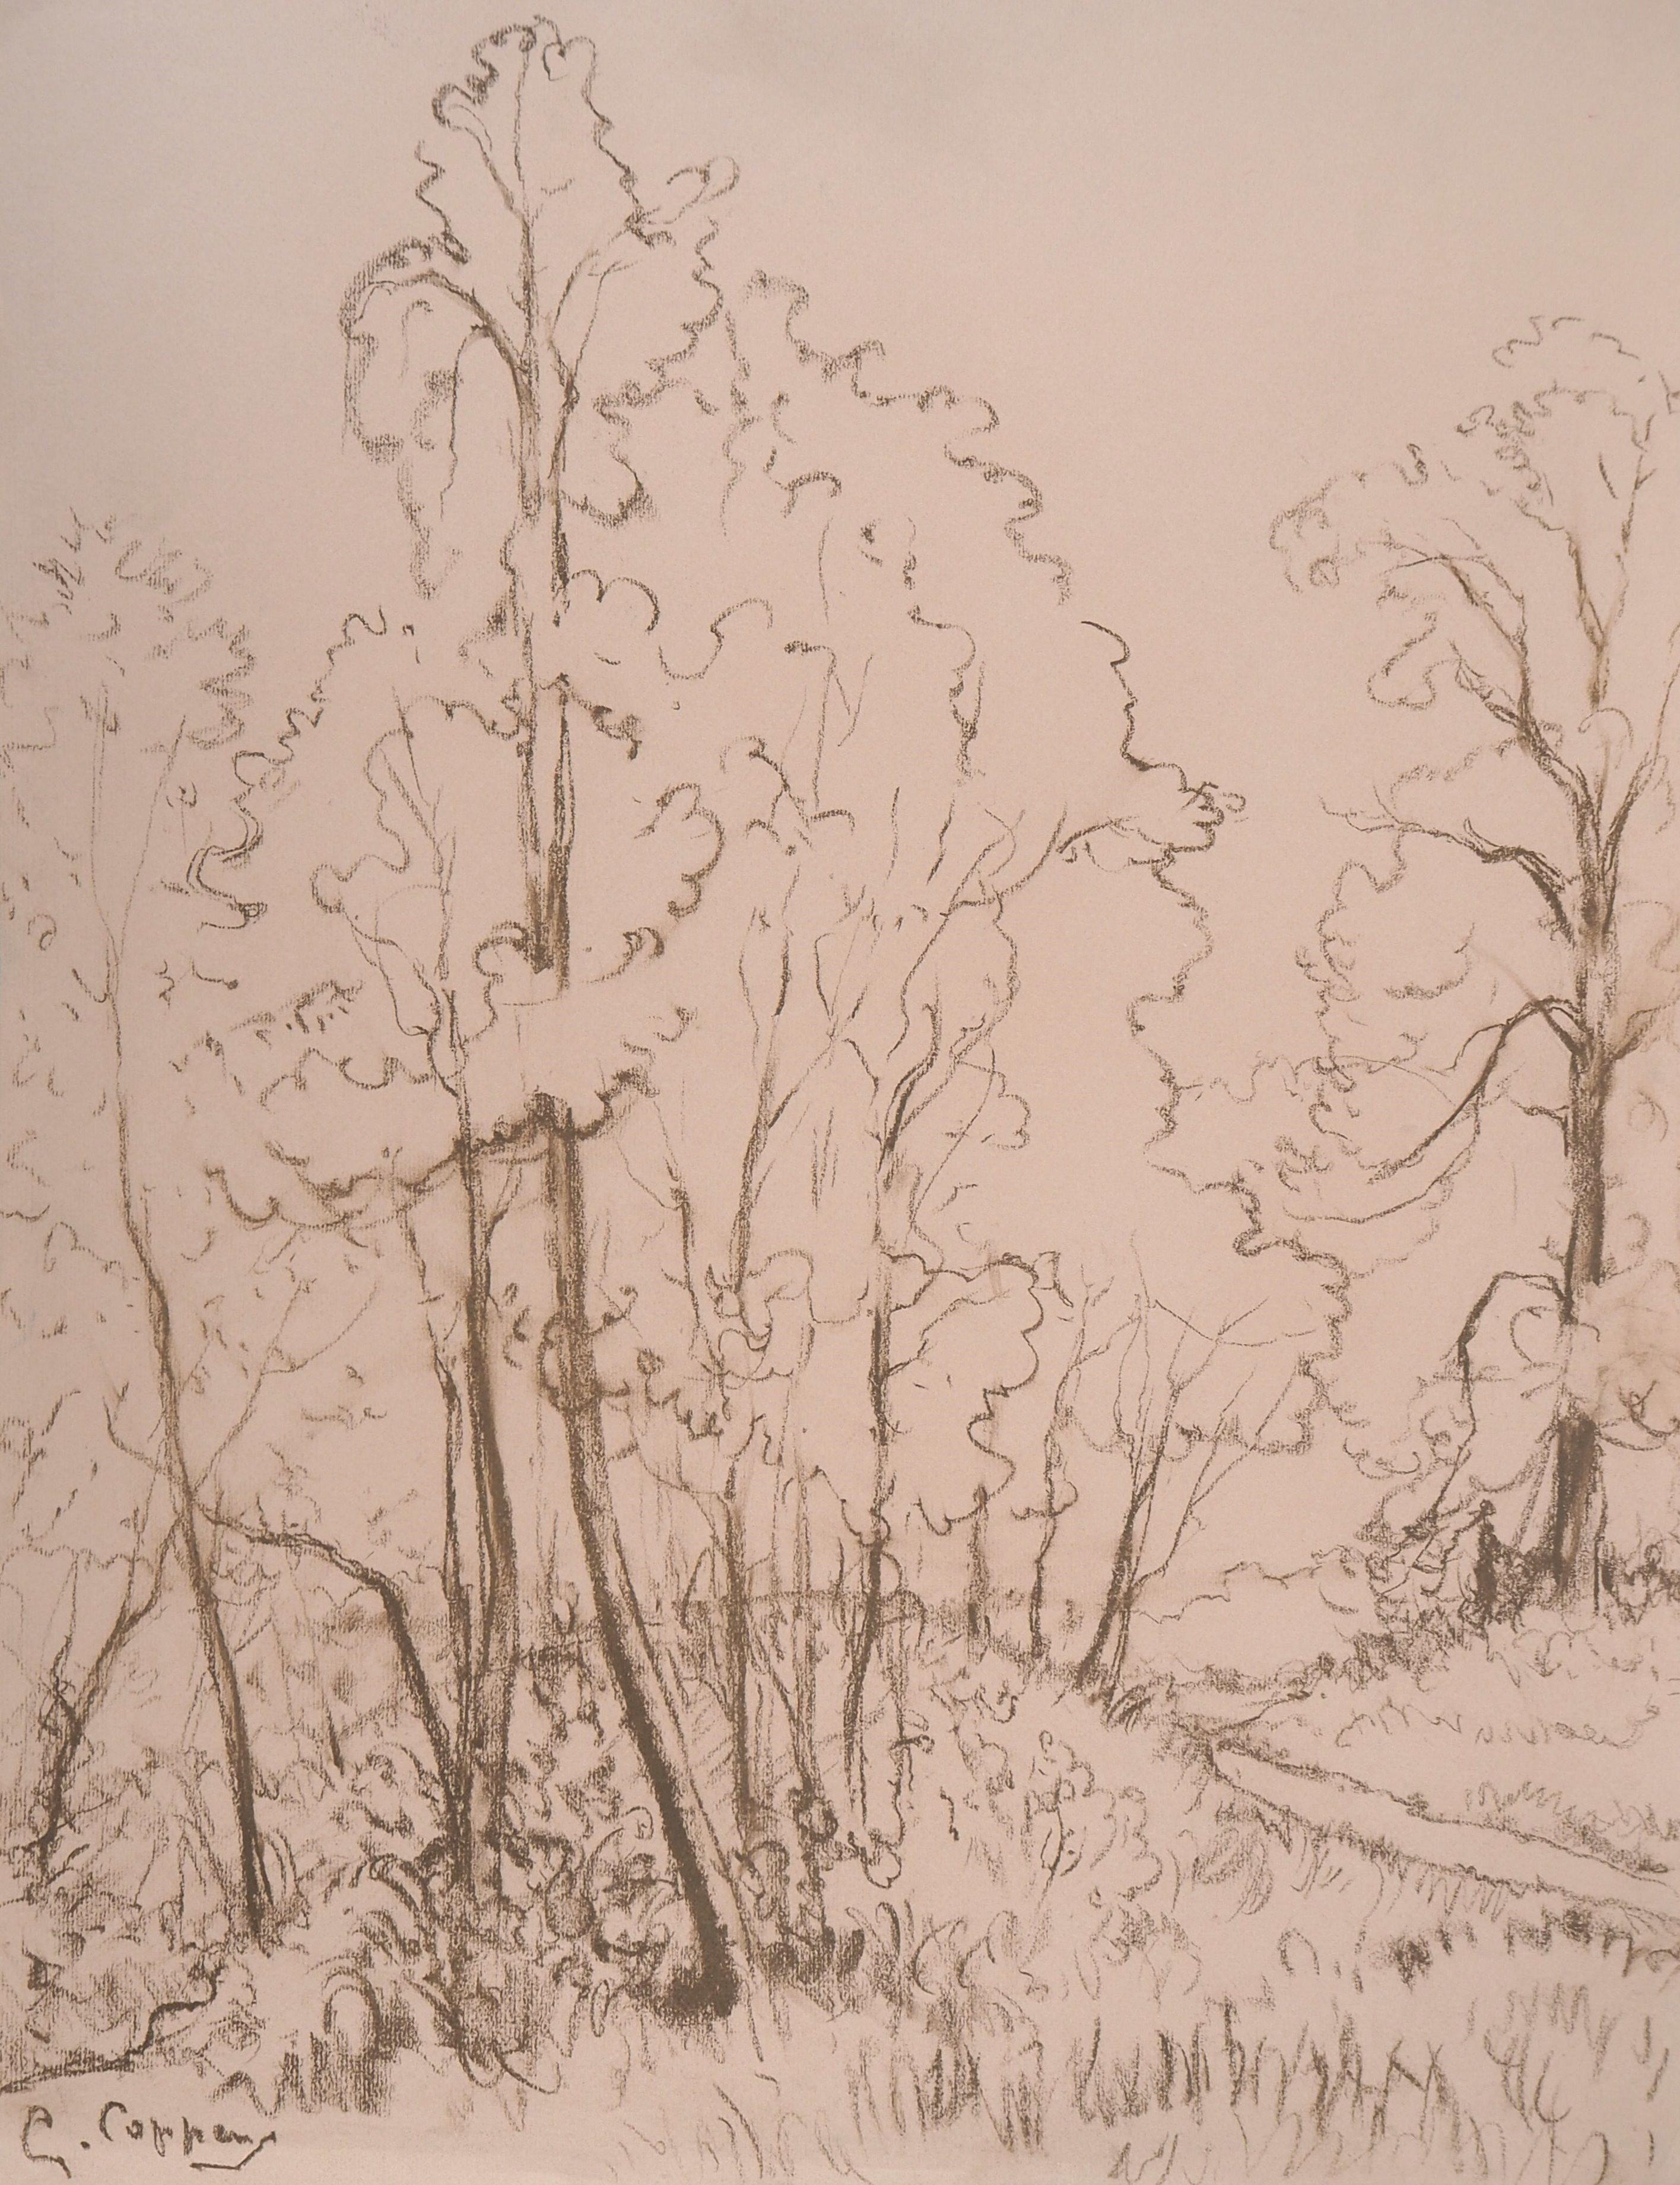 Gaston Coppens Landscape Art - Morning in the Forest - Original Signed Charcoals Drawing